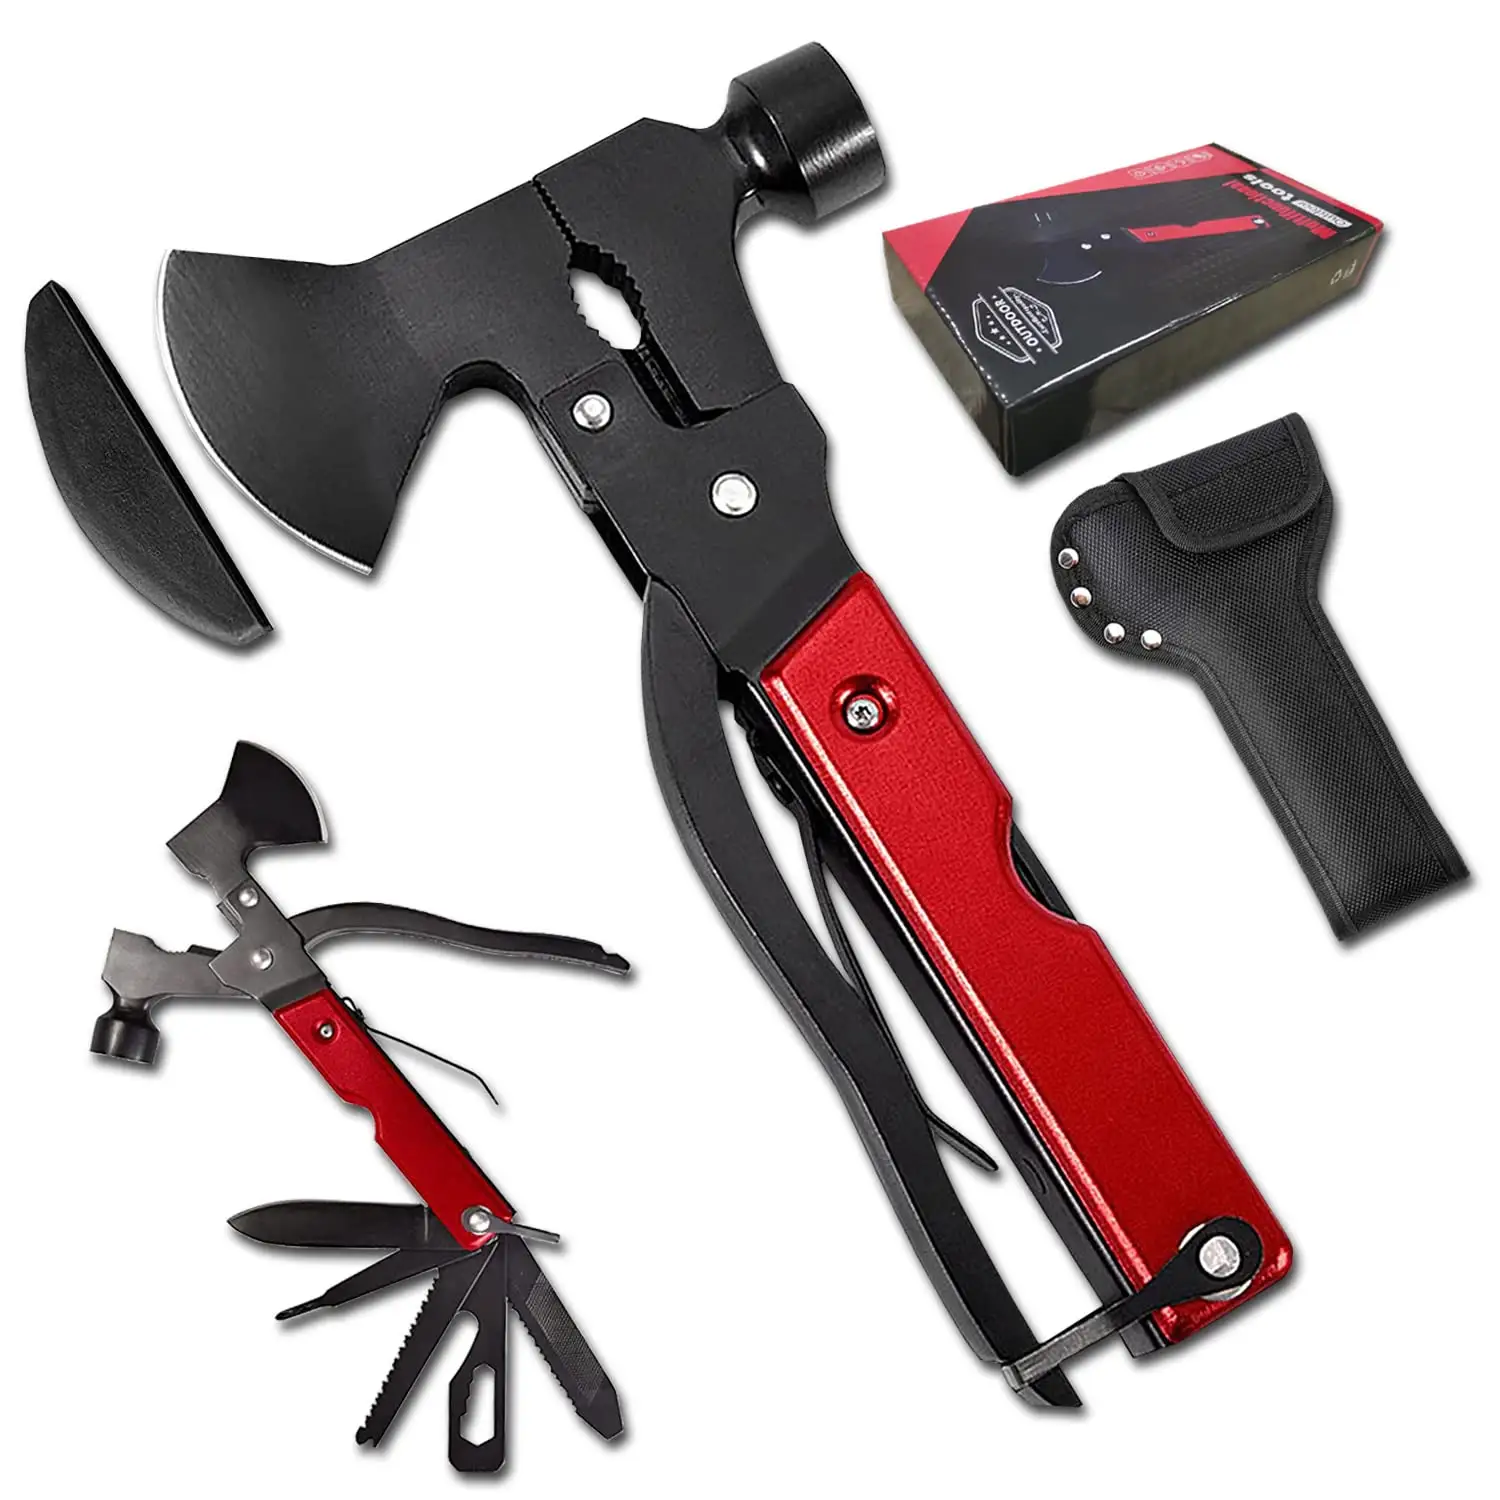 Multitool Camping Accessories Survival Gear Equipment Hatchet with Hammer Axe Saw Screwdrivers Pliers Bottle Opener